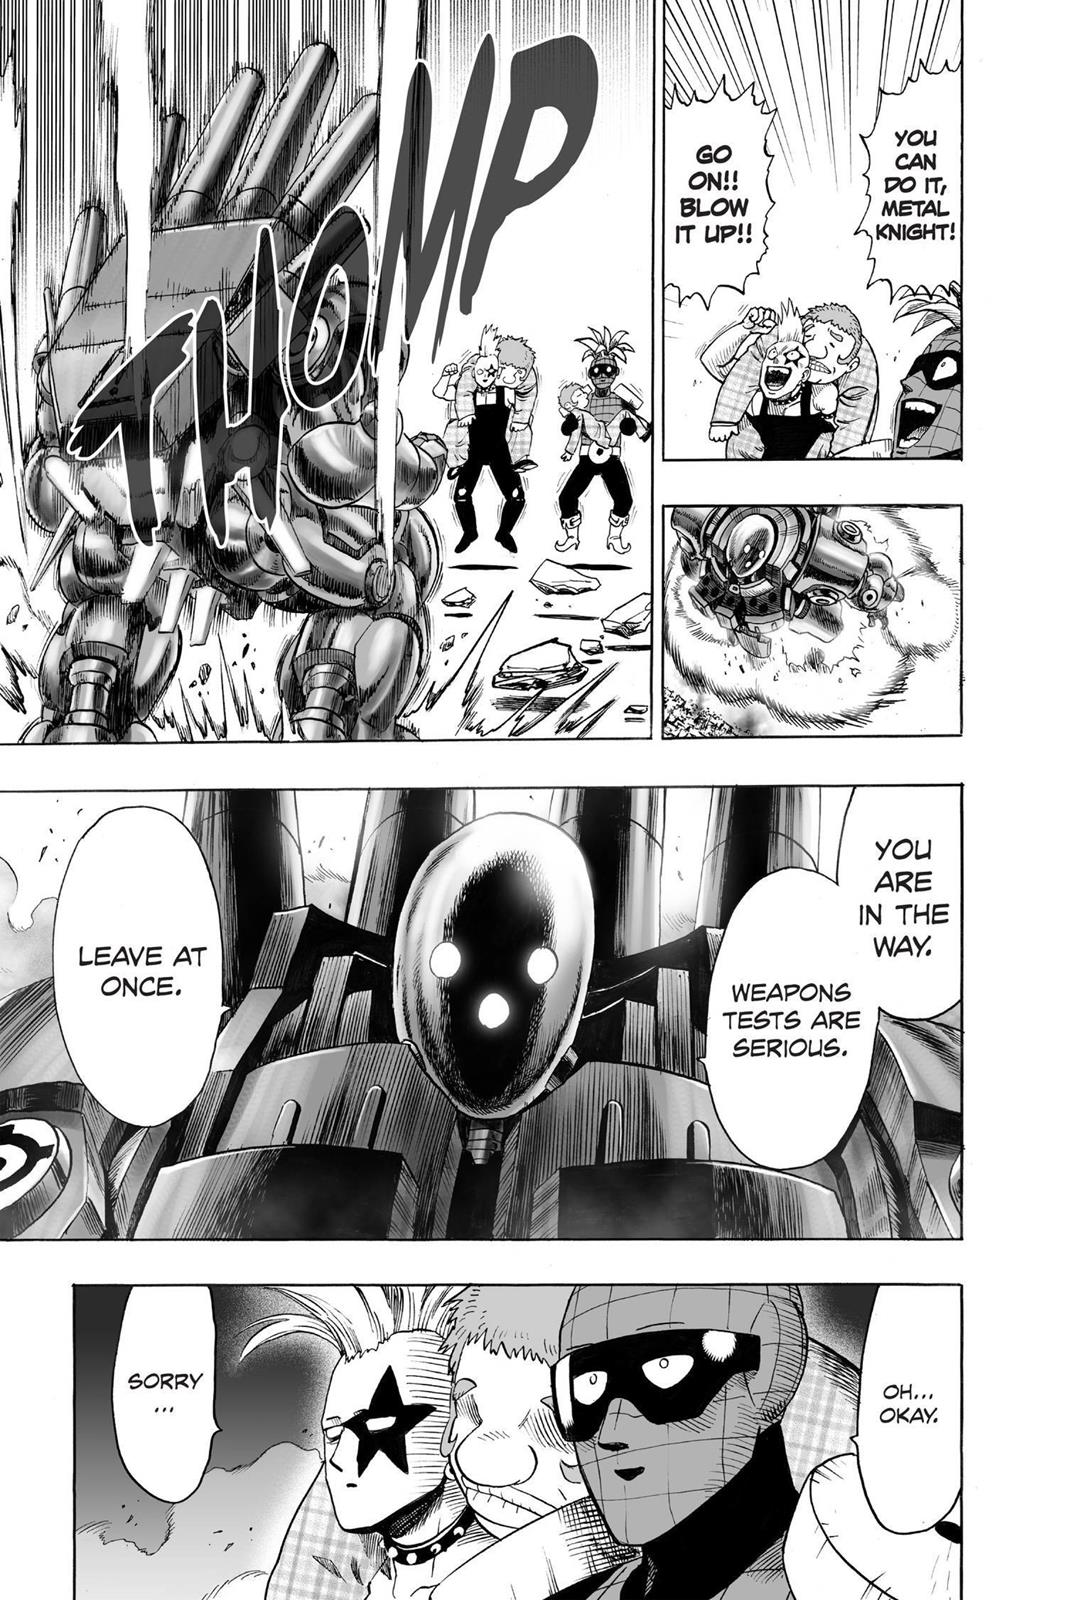 One-Punch Man, Punch 58 image 10